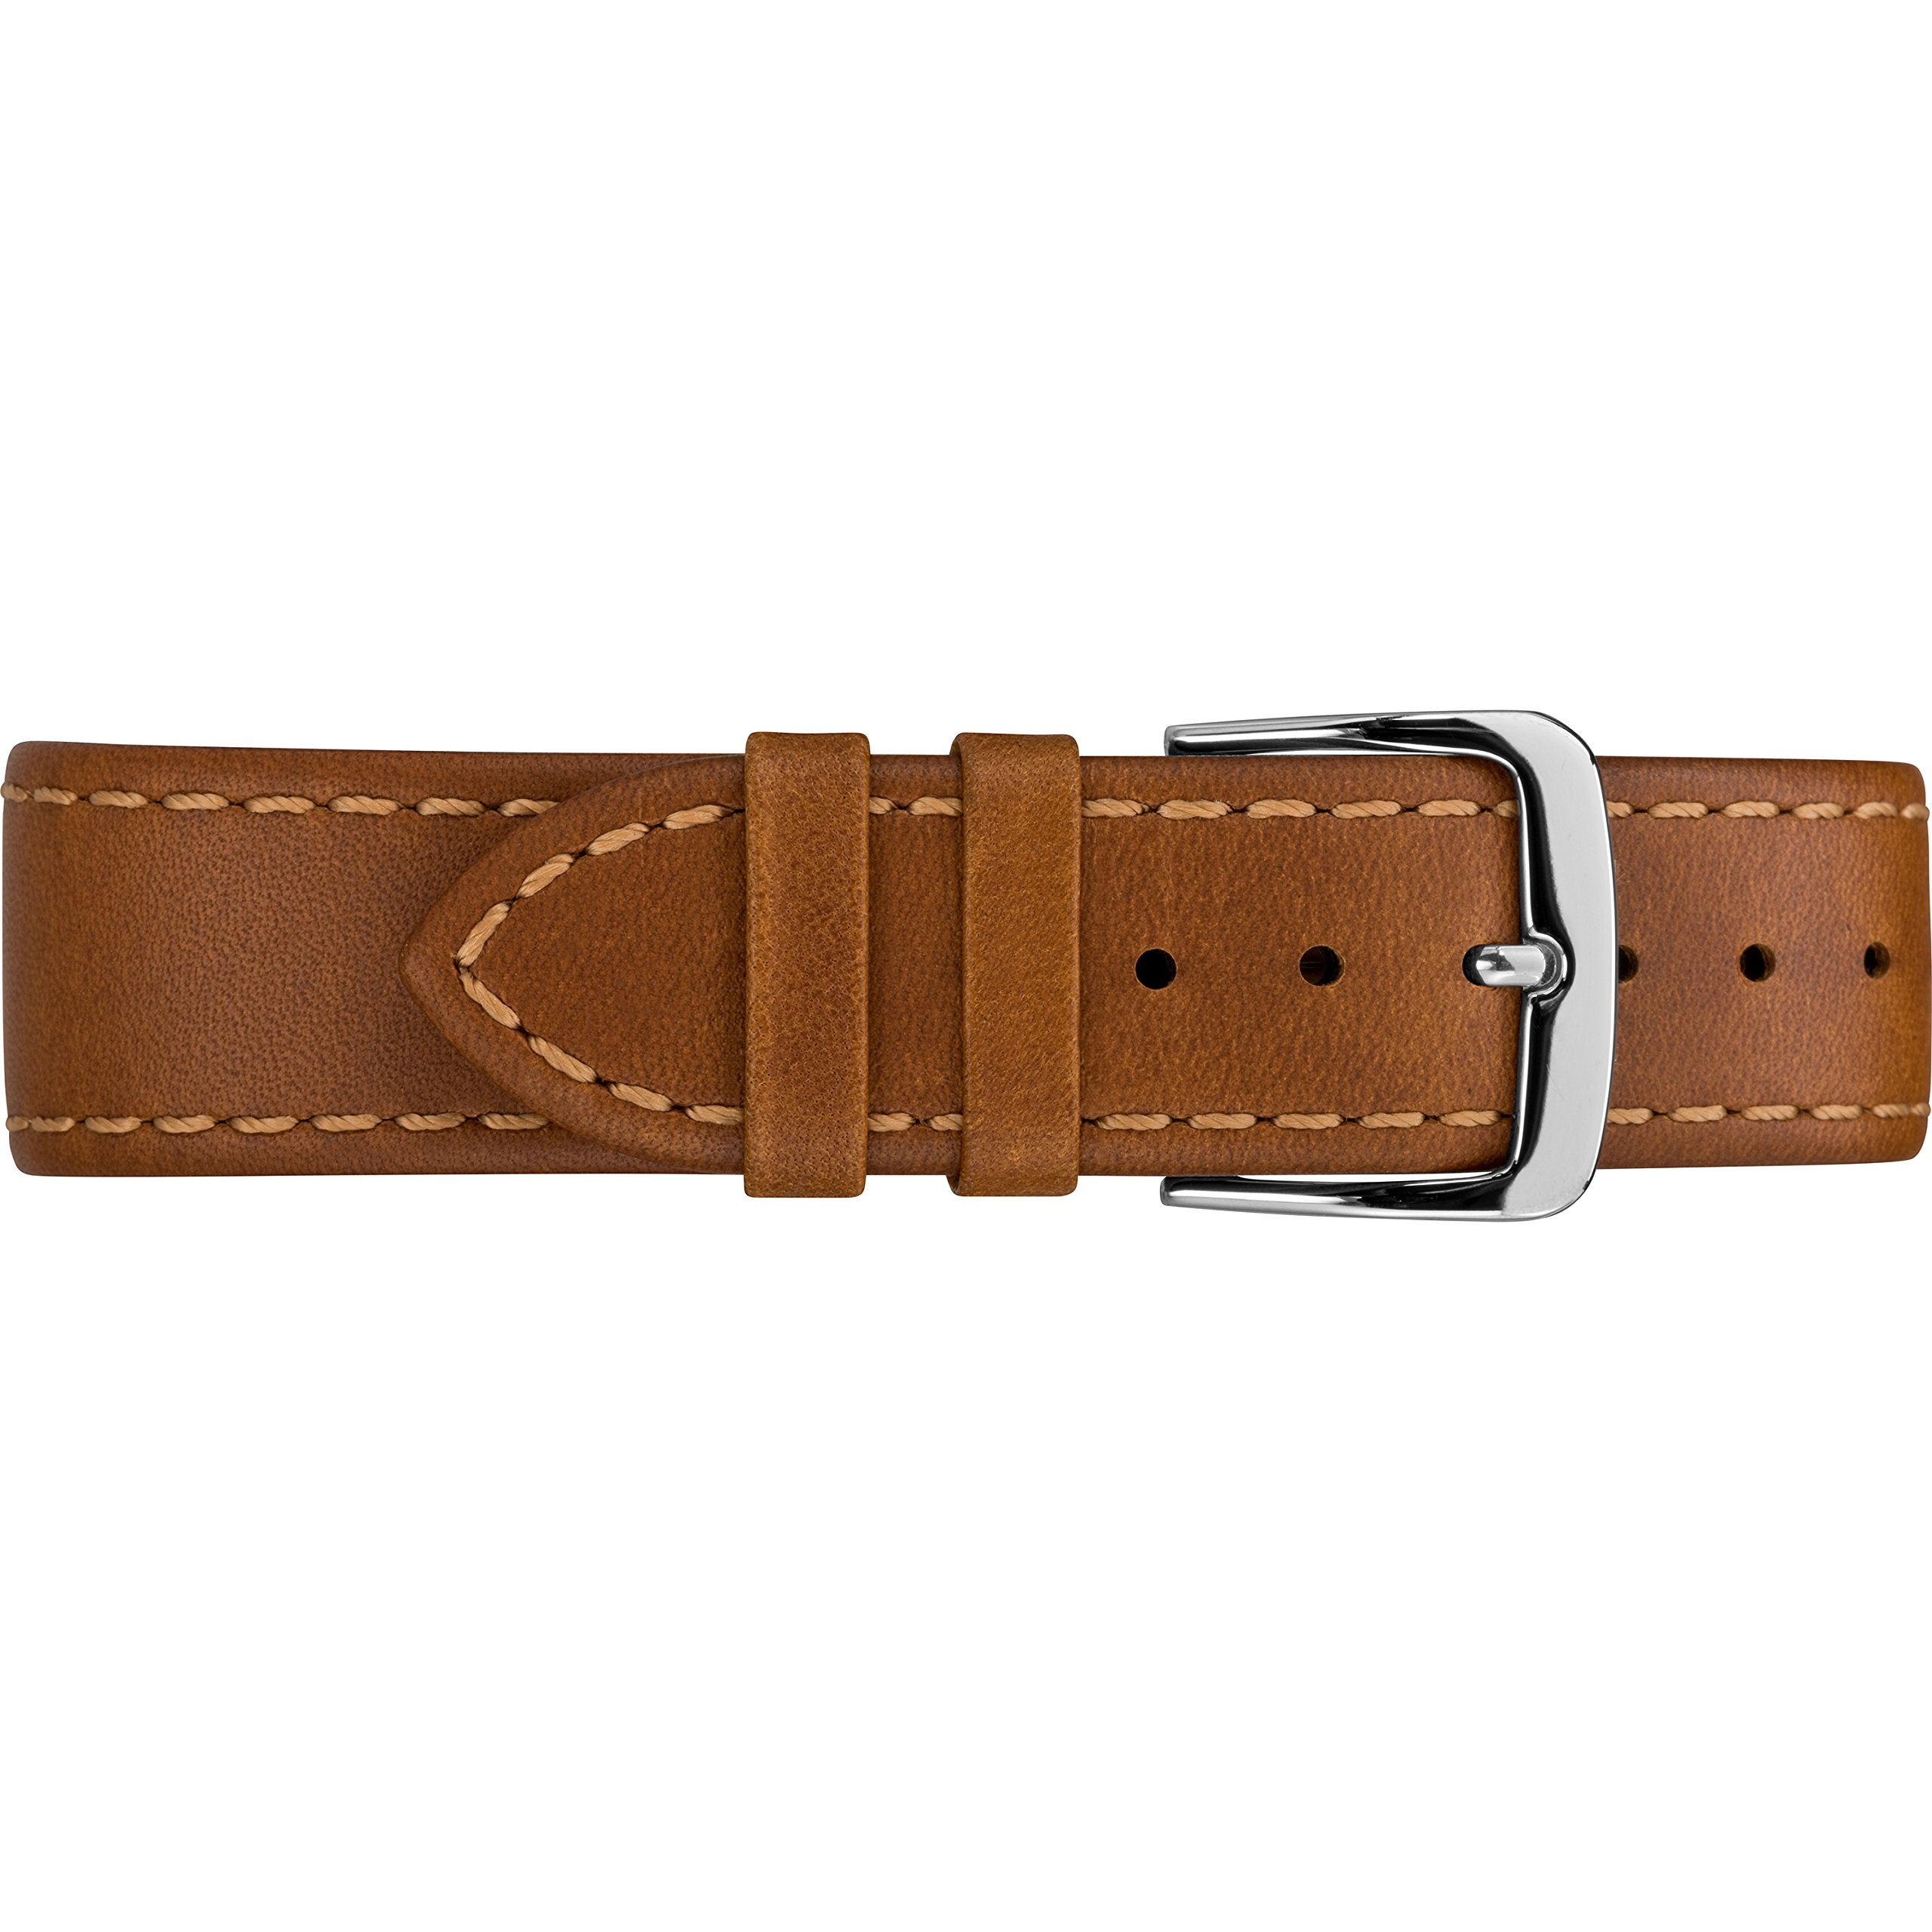 Timex Men's Southview 41mm Leather Strap Watch